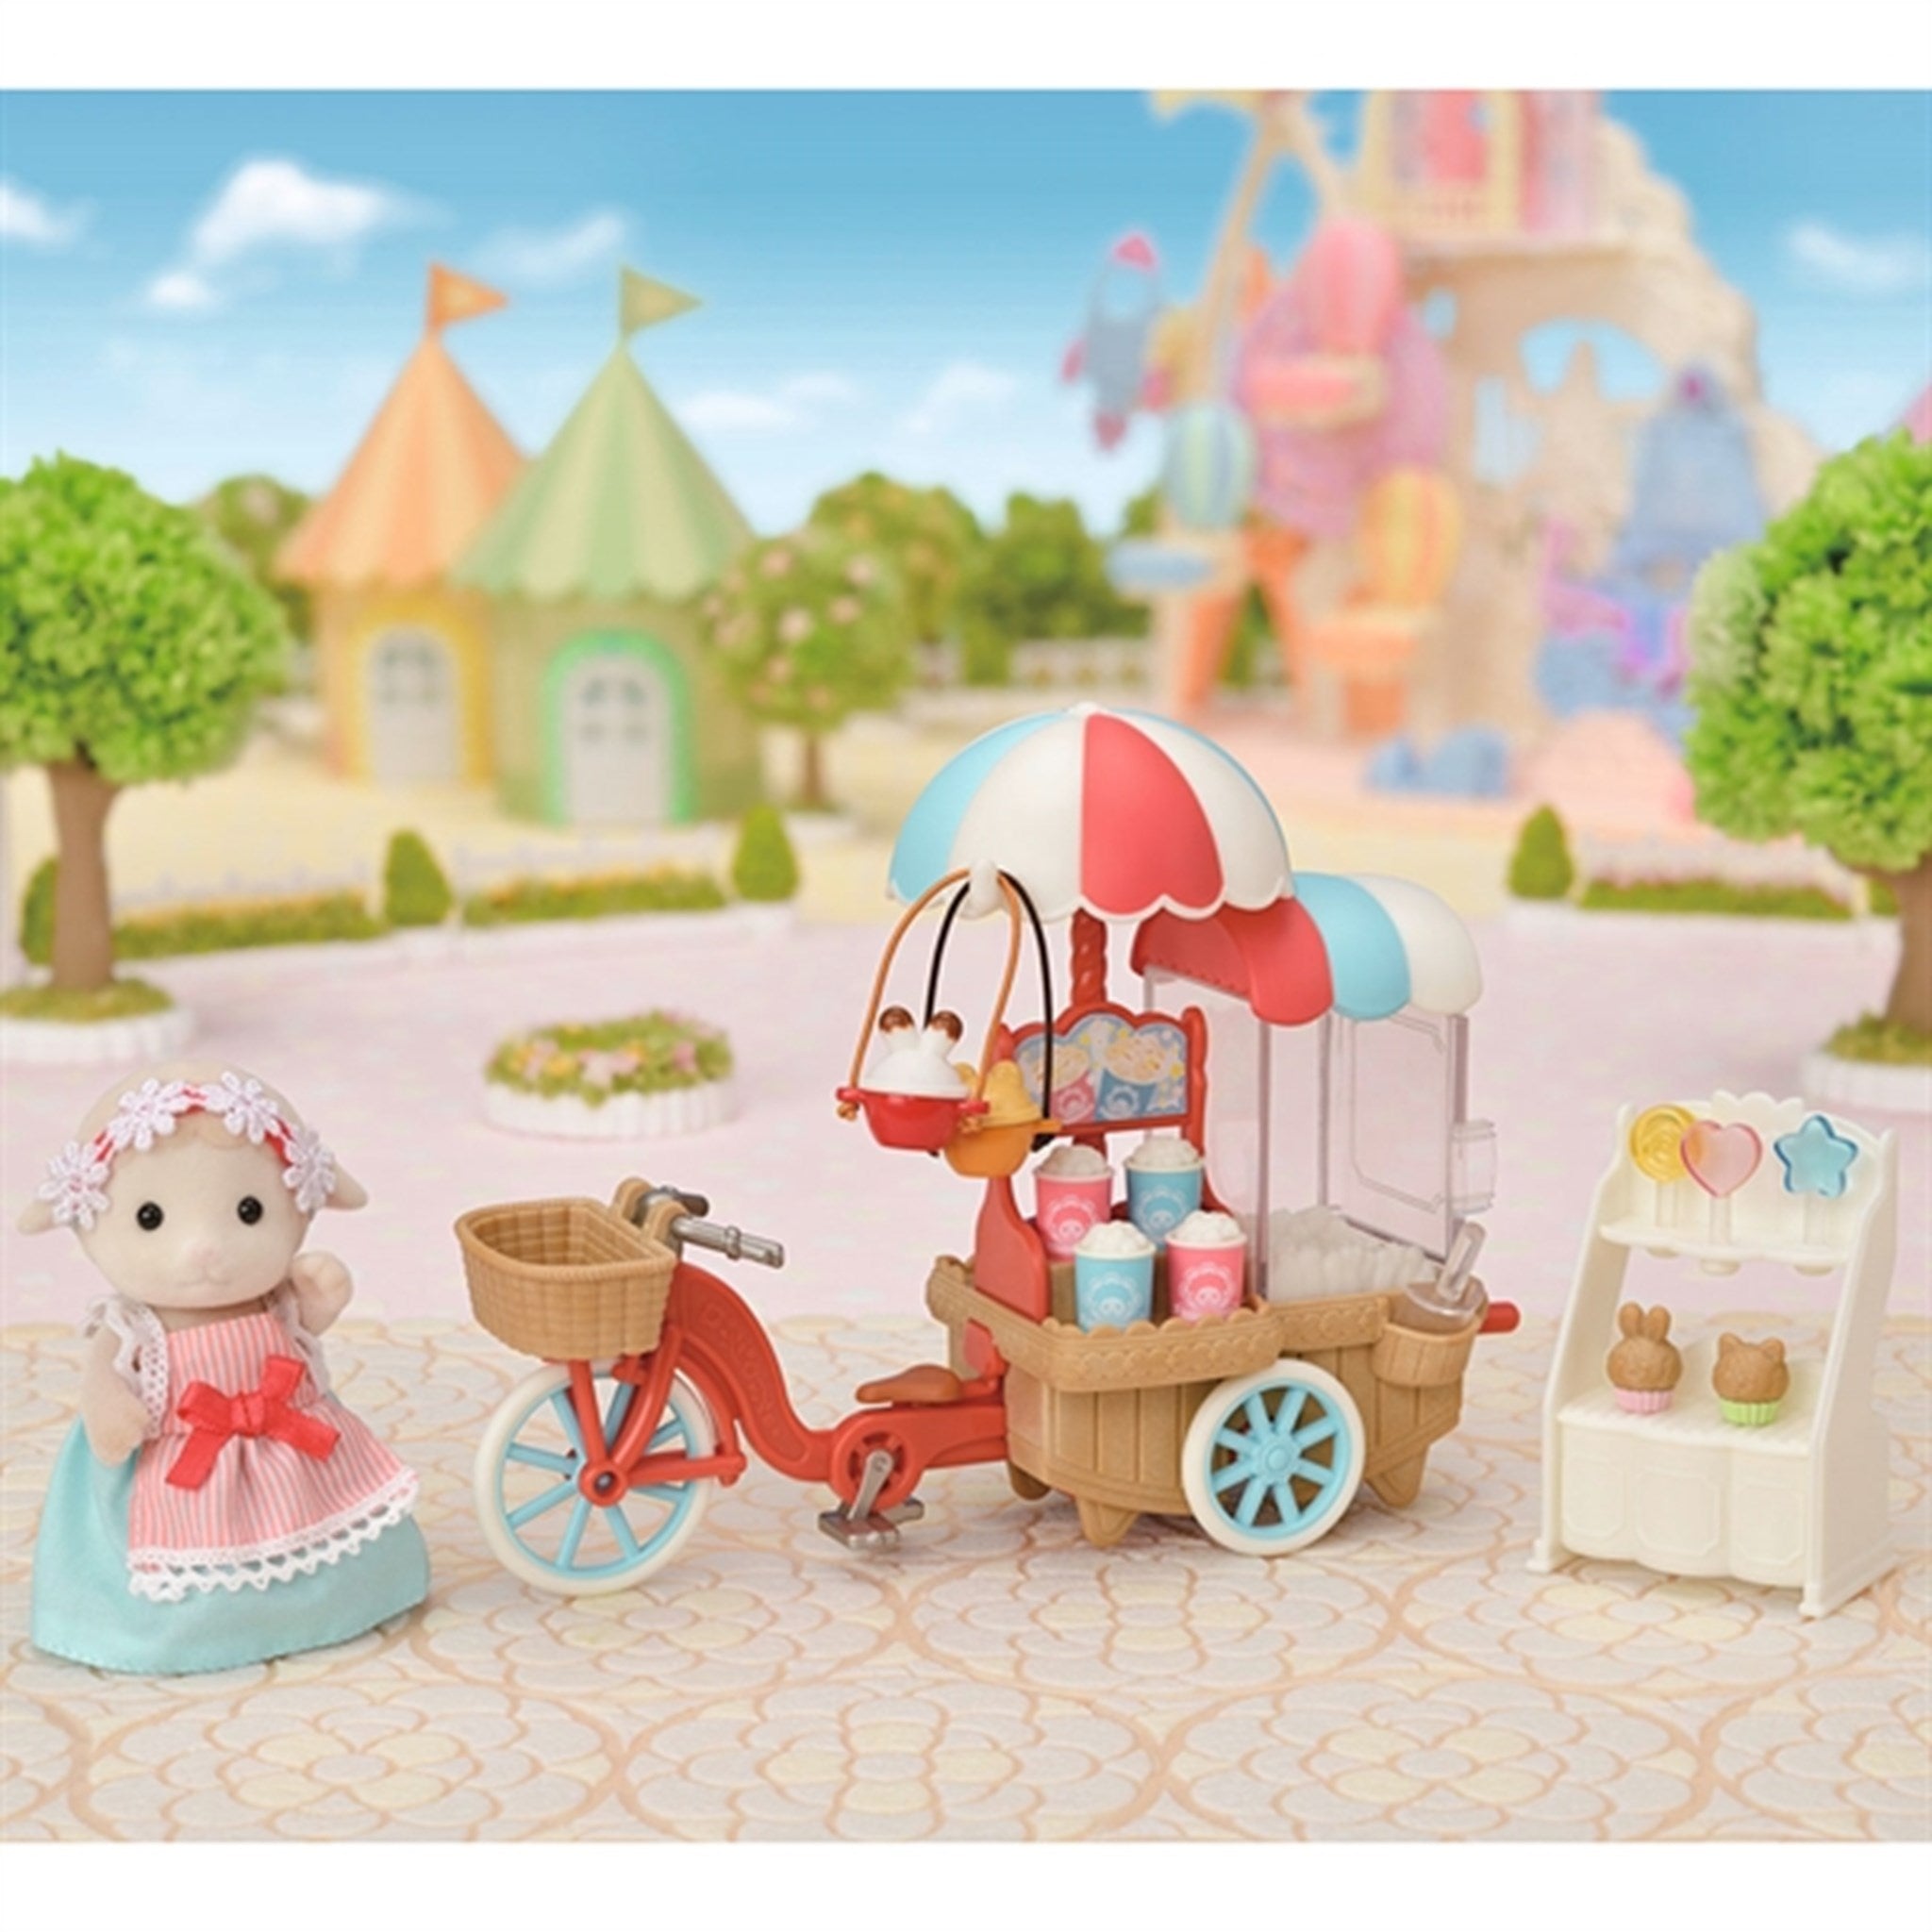 Sylvanian Families® Popcorn Delivery Service With Figur 3